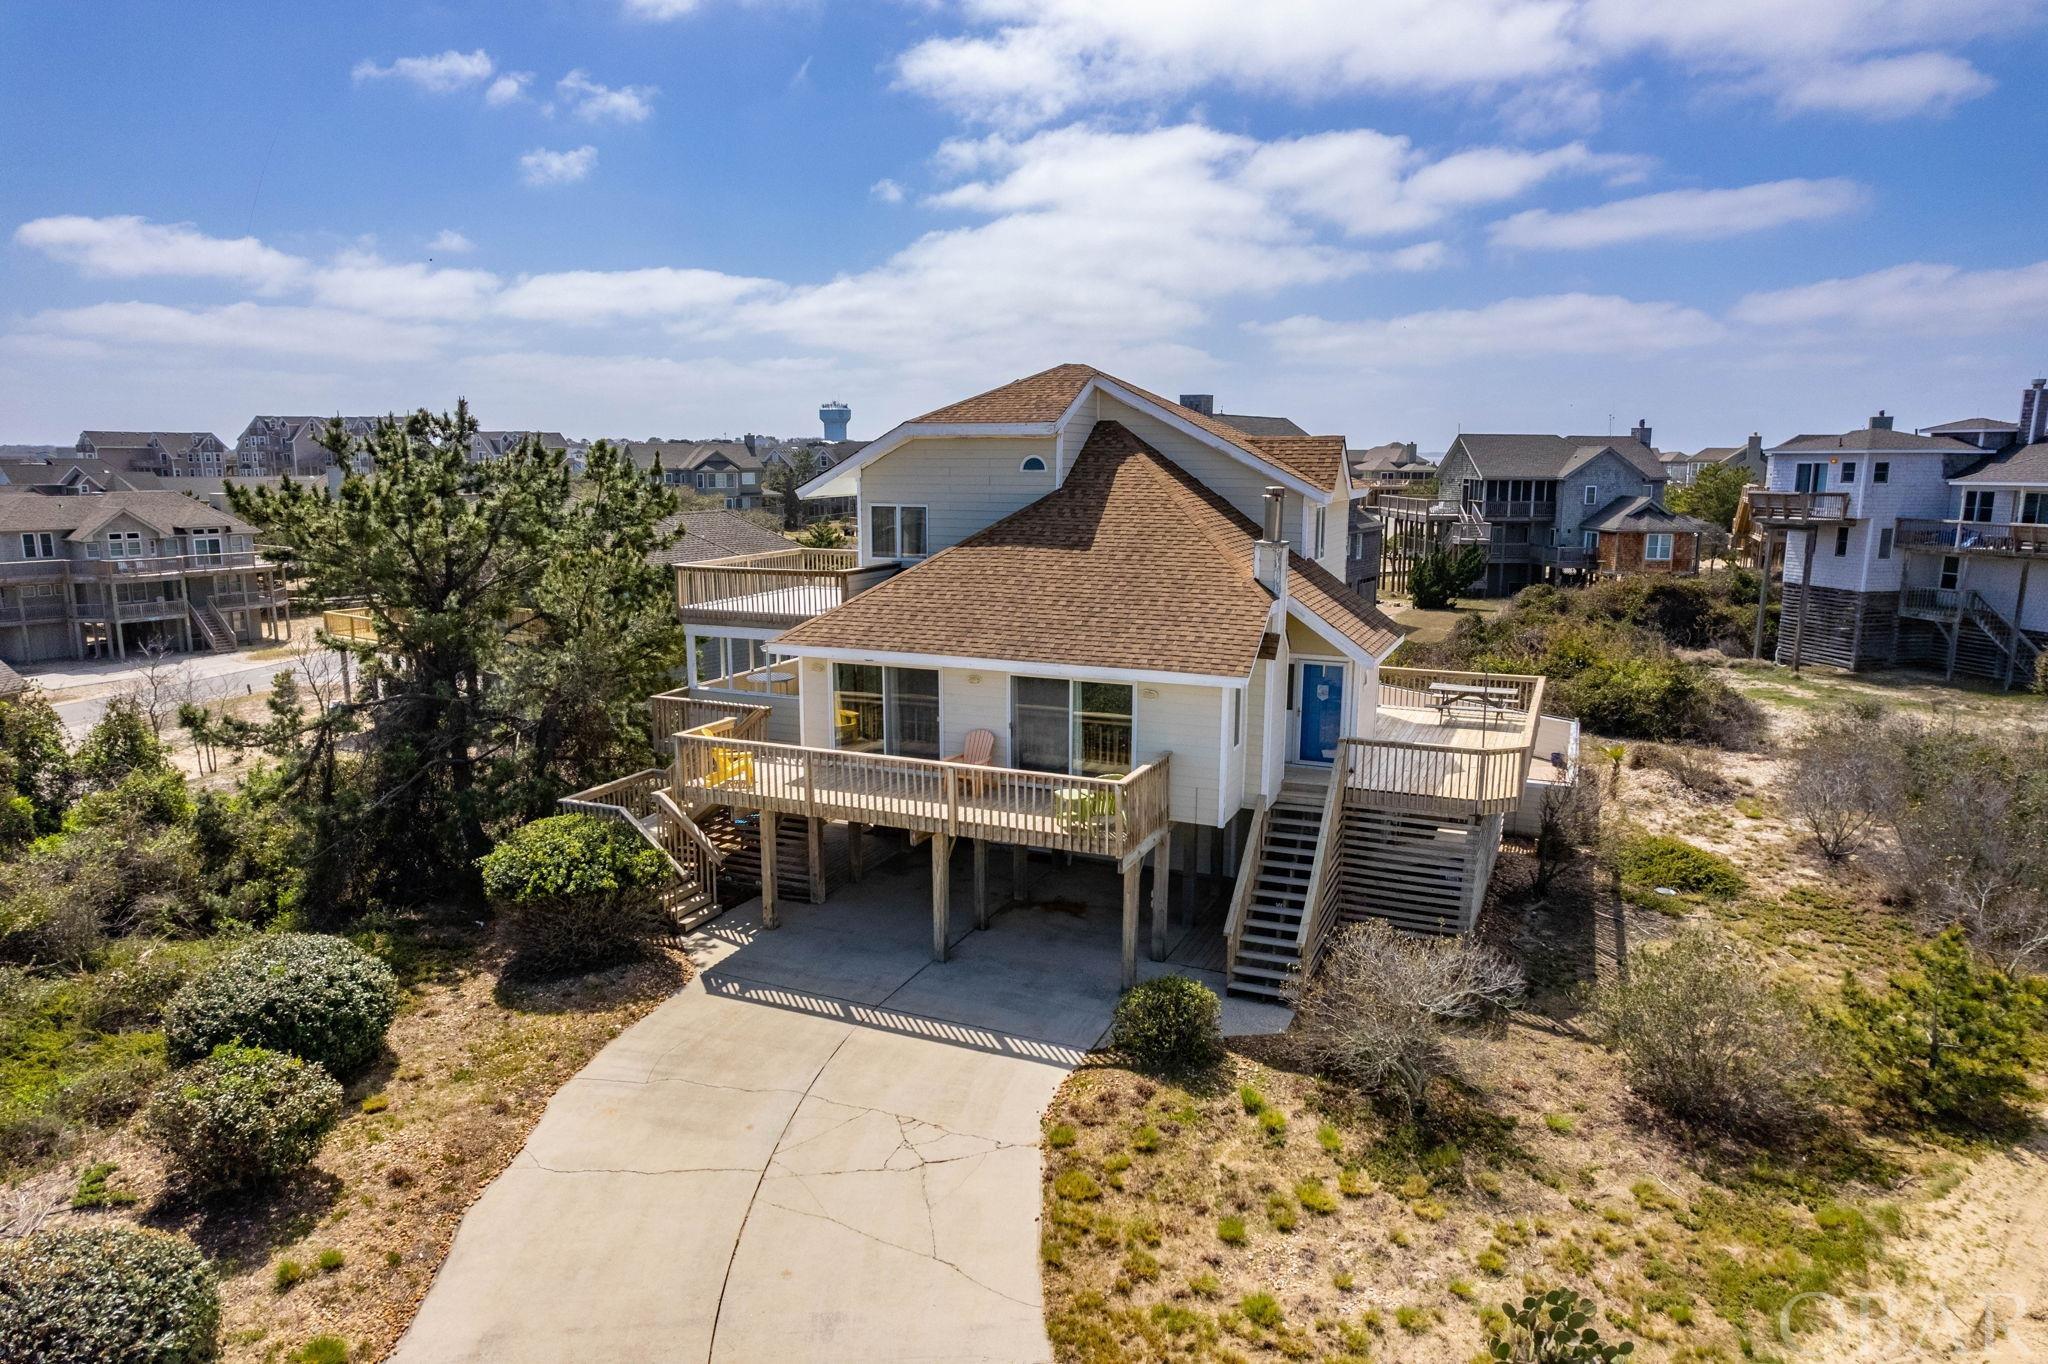 Location is everything and more with this one! INCREDIBLE VIEWS. The high elevation (28-30 feet) at the top of the dune gives this property commanding views of the ocean and Research Pier property.  Sandy Ridge is a small community with private beach access. Although rentals are allowed, most of the homes are used exclusively by the owners.    The 15,000 s.f. site is 145 feet wide and 103 feet deep. This will allow for a home with exceptional curb appeal and architectural significance.    The current home has been used as a second home for years. It has just over 2000 s.f. with four bedrooms, three full baths, an open concept kitchen/dining living room, a lovely, covered porch, and another common area/media room with a bath on this ground level as well. The main living area is perfect for taking in the views and has a great feel with a vaulted ceiling. The porch adjacent to the kitchen enjoys sublime summer breeze! On the top floor, 2 bedrooms share one bath. The top deck has even better views of the ocean and sound. On the main floor there are also 2 bedrooms and one bath.  Outside there is a 14 x 34 heated pool with a very beachy feel!  This home is great as it is, or you could expand the kitchen and add baths! This site is so incredible that it is easy to envision a new home here too!  All of the lots to the east of this home are developed. There is no vacant lot between 116 and 118 Sandy Ridge so those great views of the ocean and pier should remain. There is a community pool that is open in the summer. There are reasonable covenants and architectural review in Sandy Ridge. With just 170 yards to the beach access, you will not find a home closer to the beach with better views and elevation!